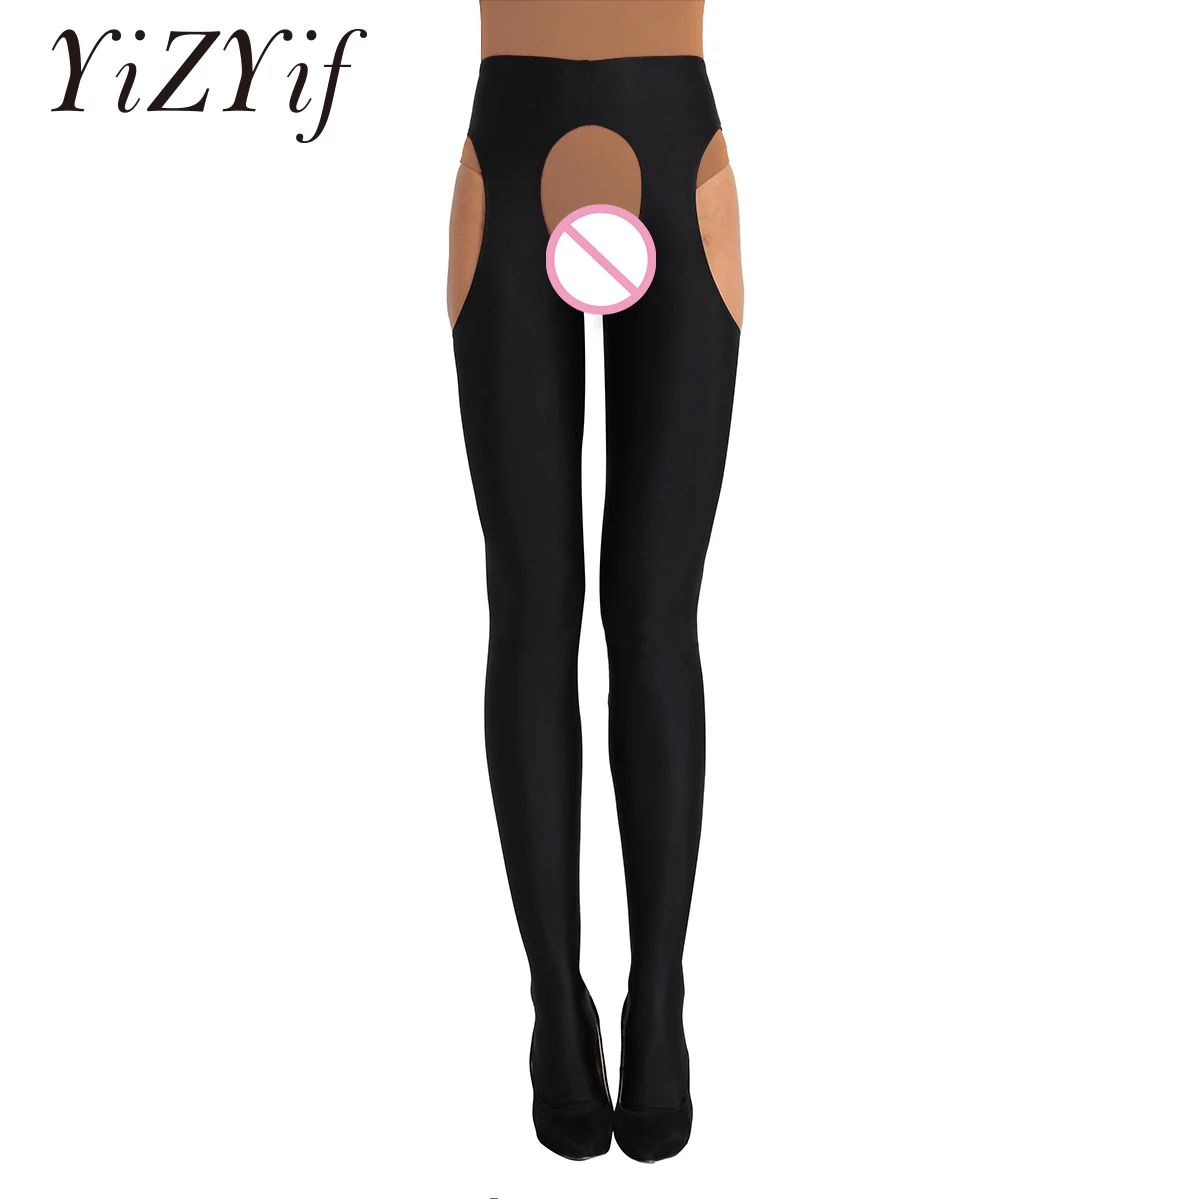 

YiZYiF 2021 Womens Lingerie Hollow Out Open Crotch Long Stockings Full-footed Stretchy Suspender Pantyhose Tights Bodystocking